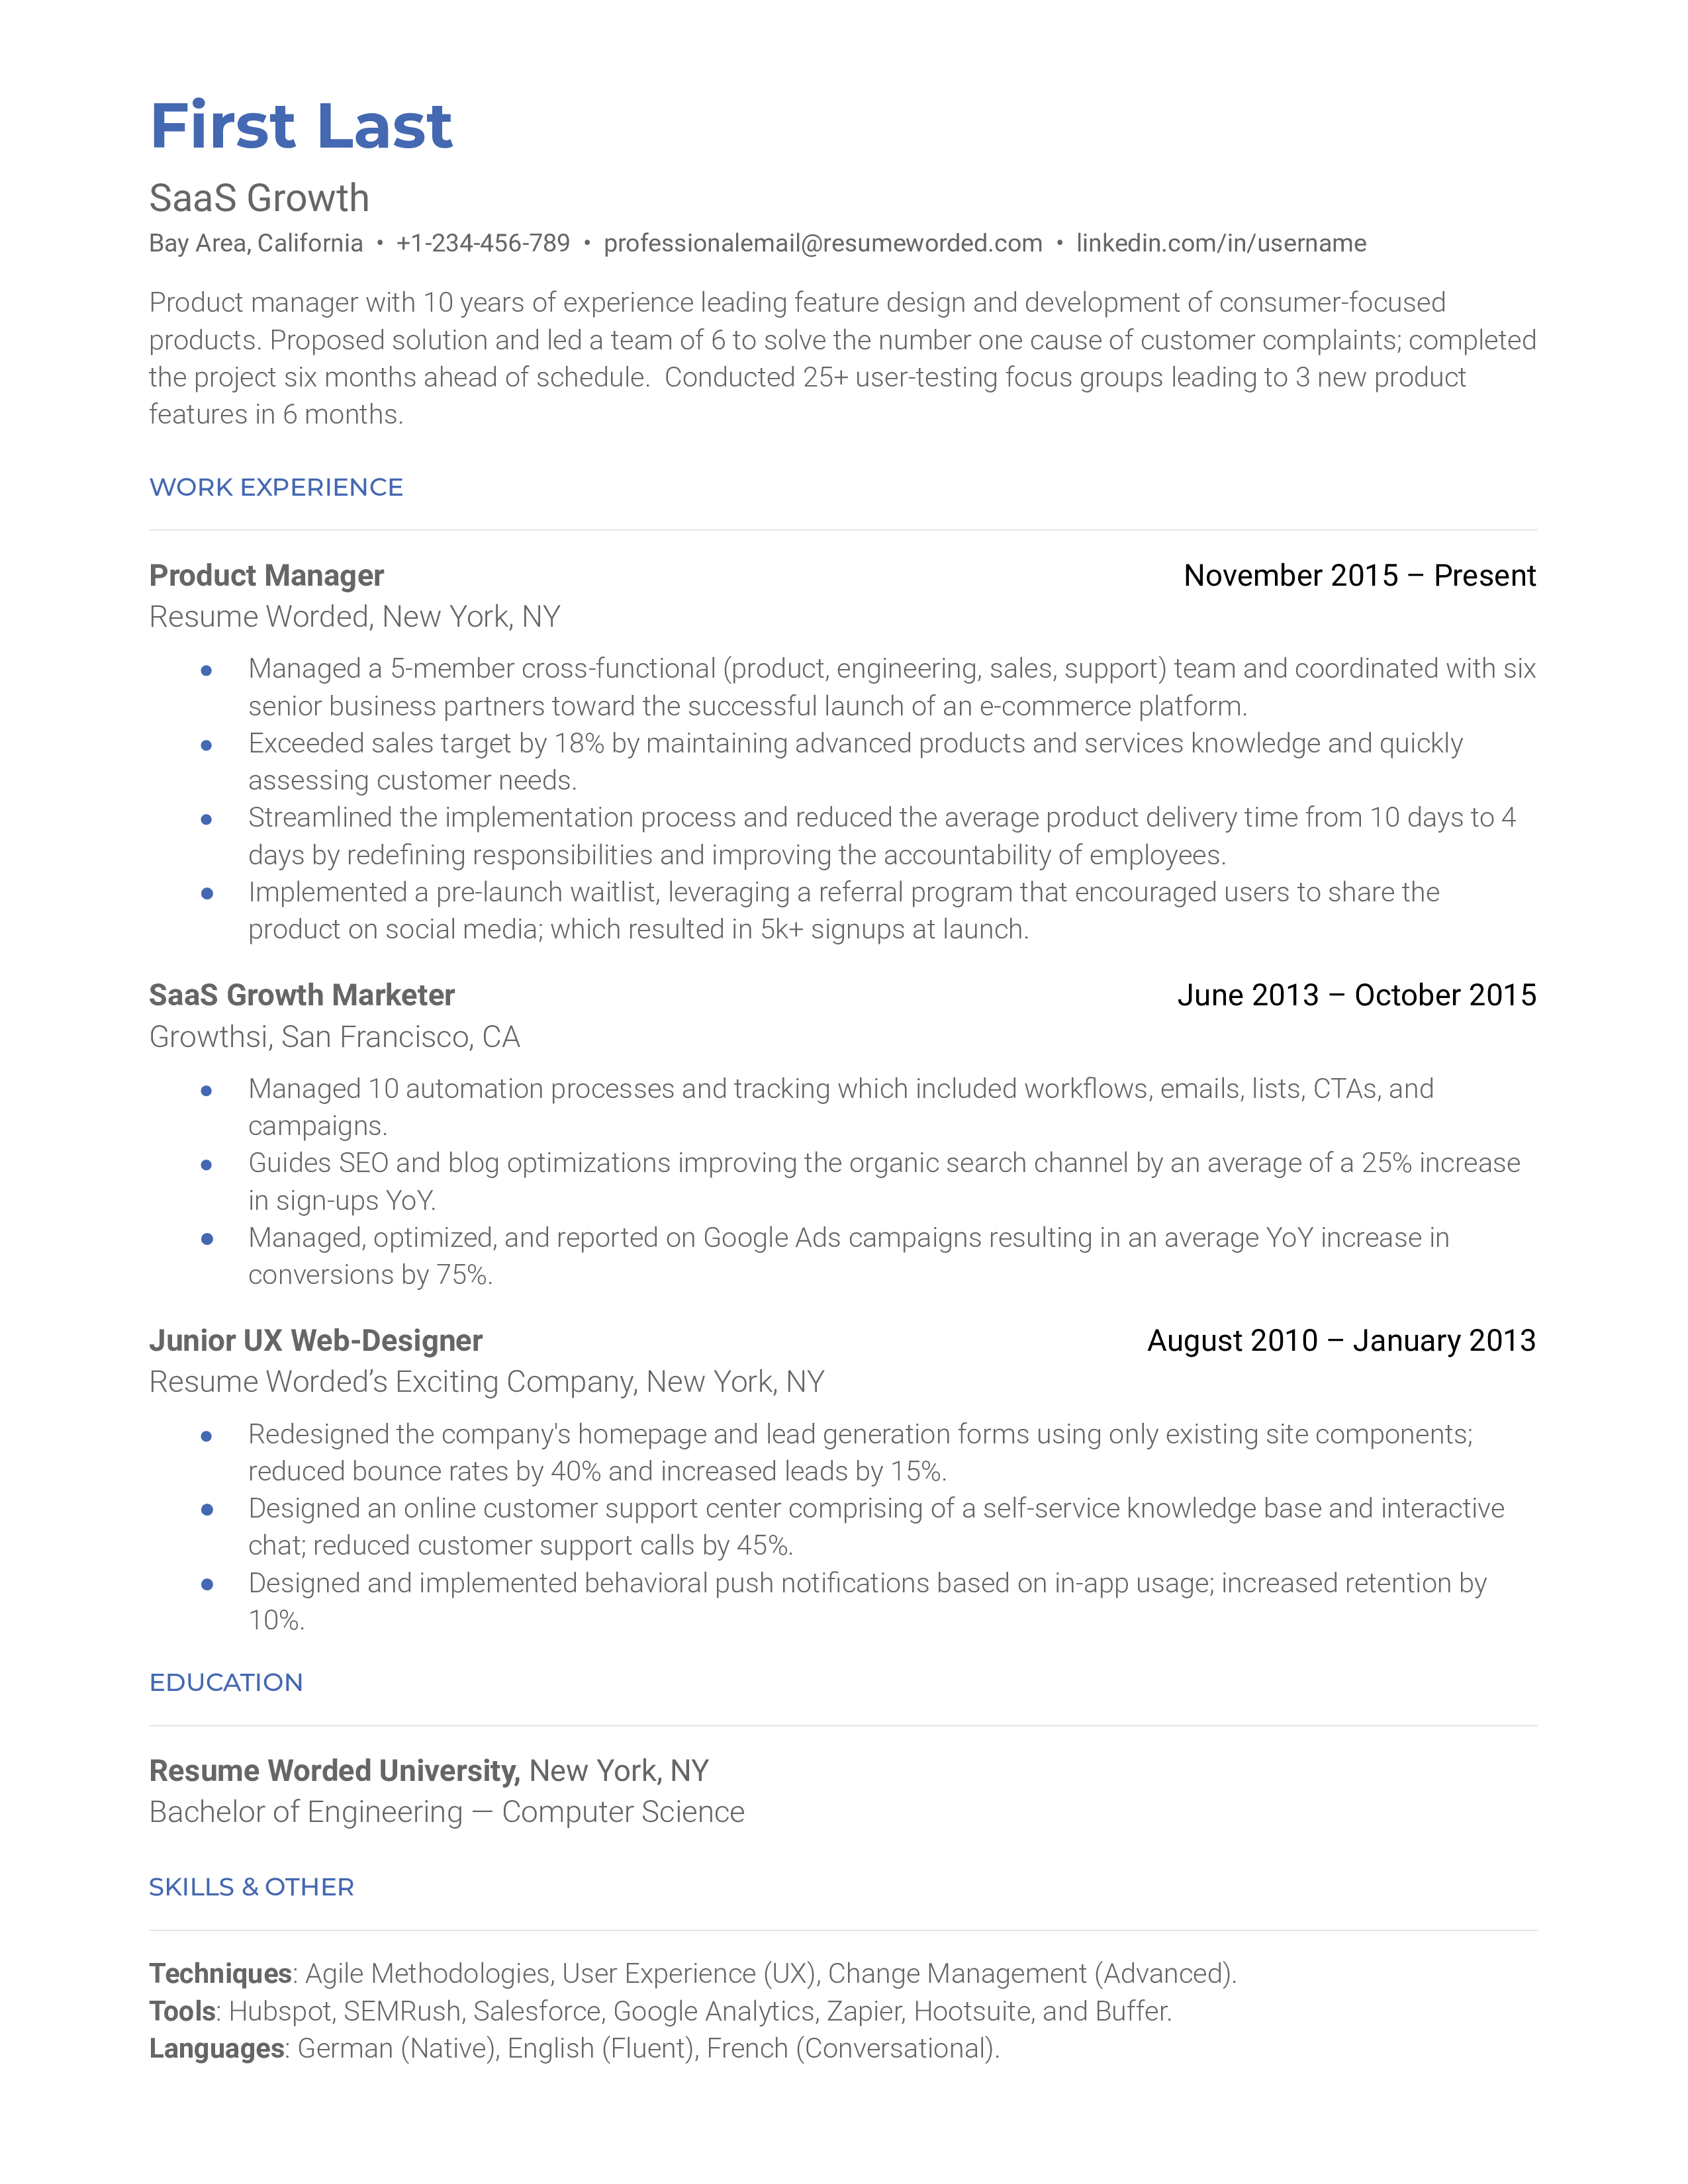 Screenshot of a CV tailored for SaaS Growth role.